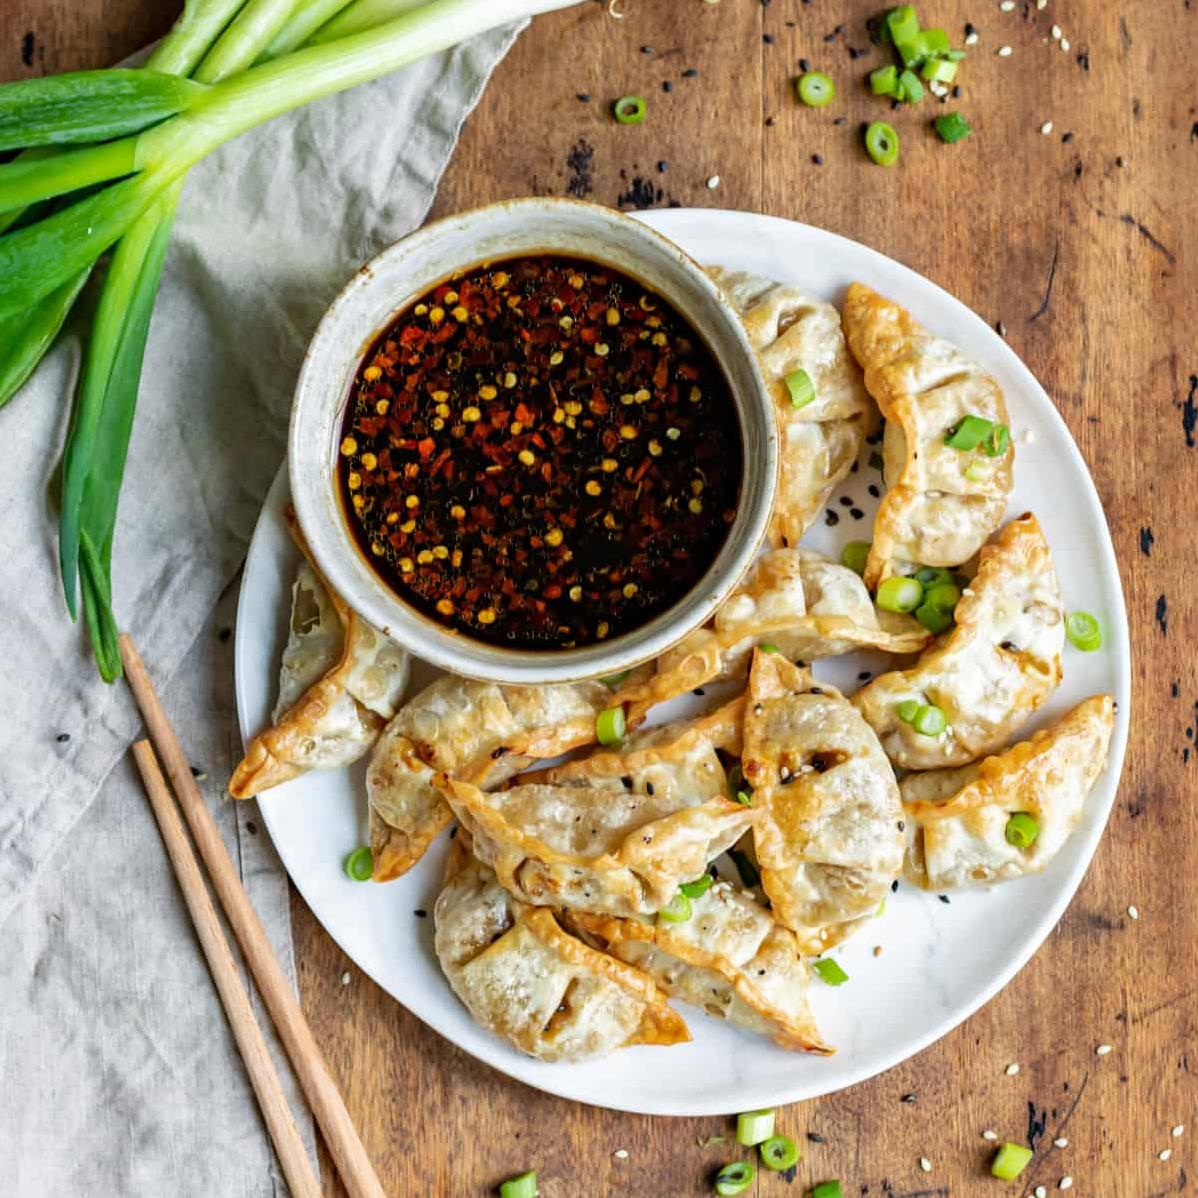  There's nothing like the satisfaction of seeing your hard work paying off with a plate full of steaming-hot gyoza.